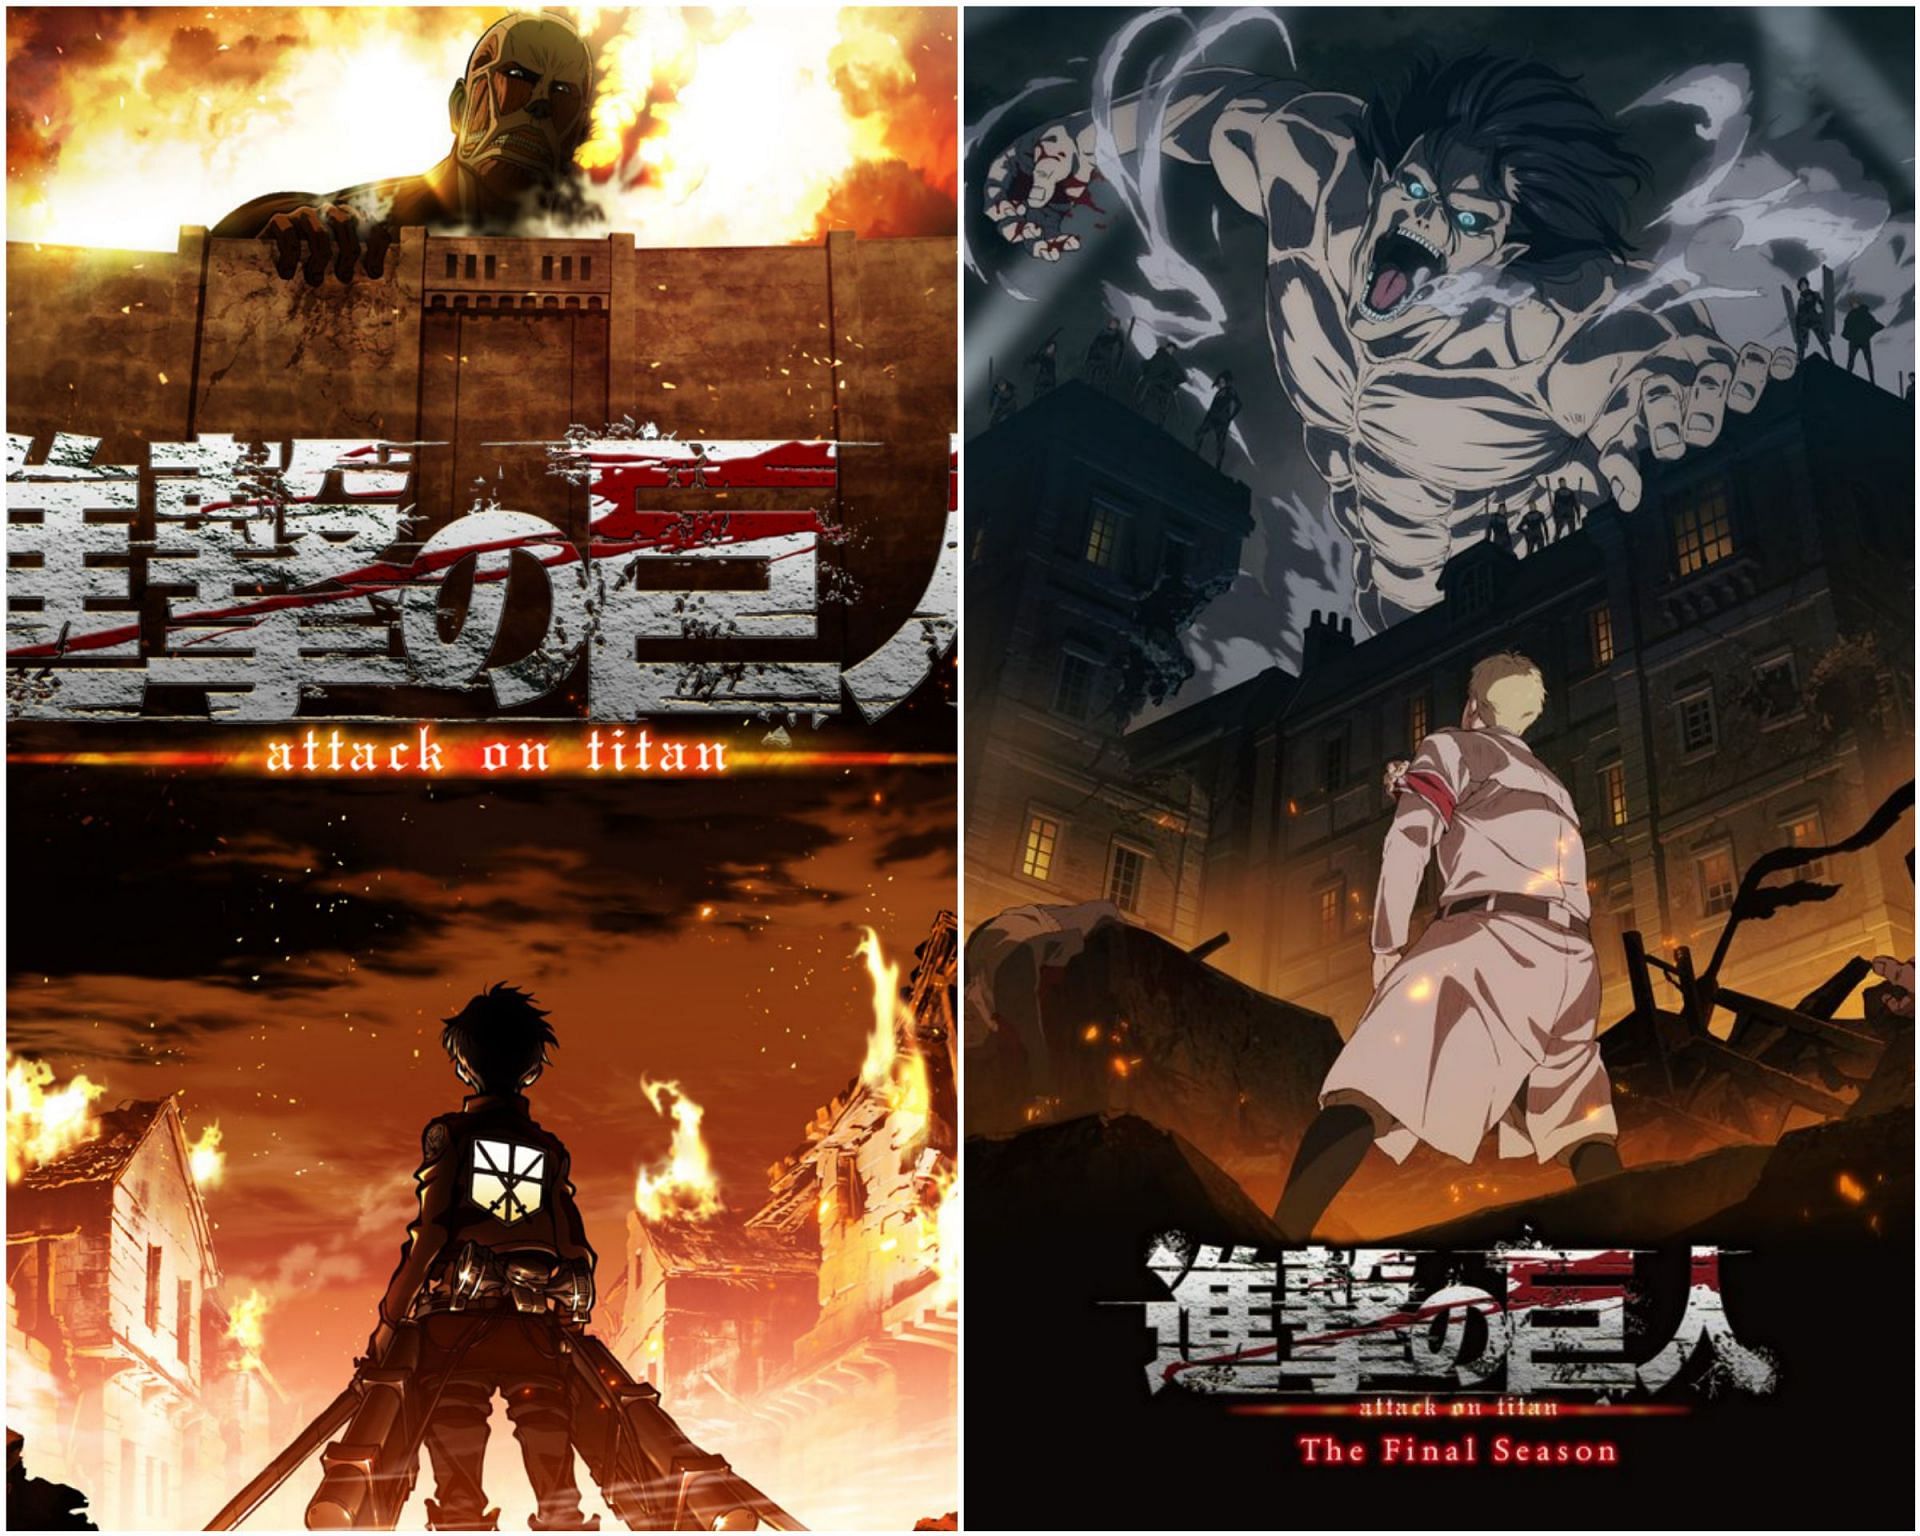 Official posters of Attack on Titan season 3 and the final season respectively, with Eren and Reiner mirroring each other (credit : Wit Studio and MAPPA)